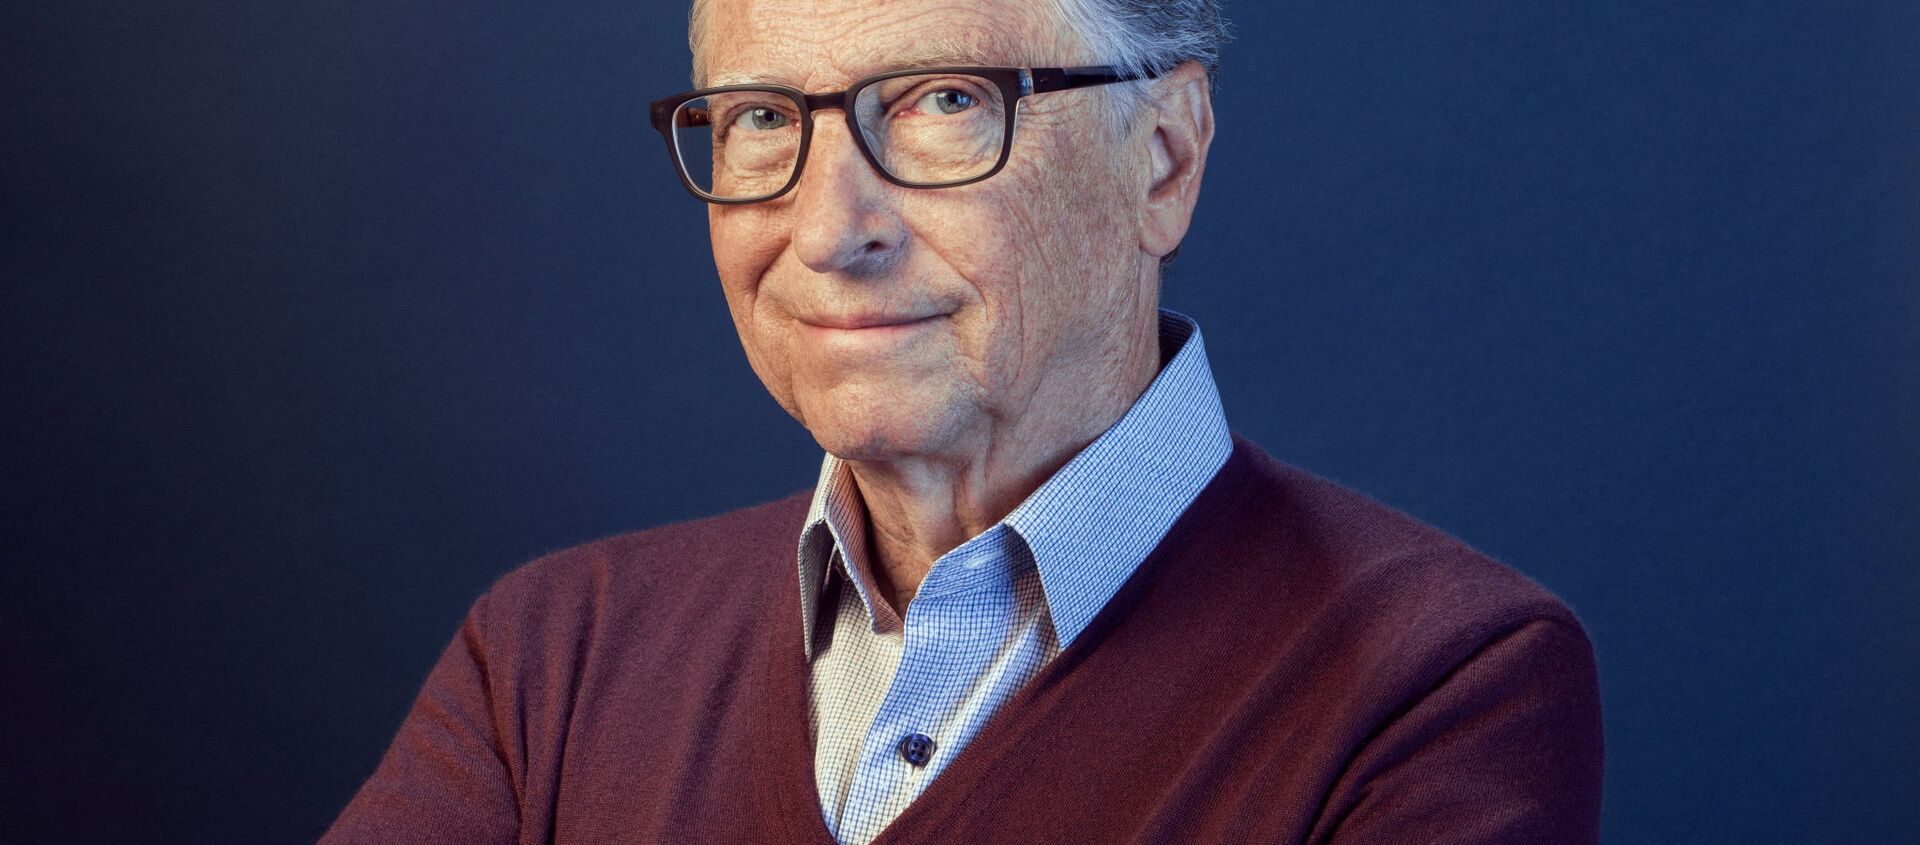 Bill Gates poses in this undated handout photo obtained by Reuters on February 15, 2021 - Sputnik International, 1920, 14.04.2021